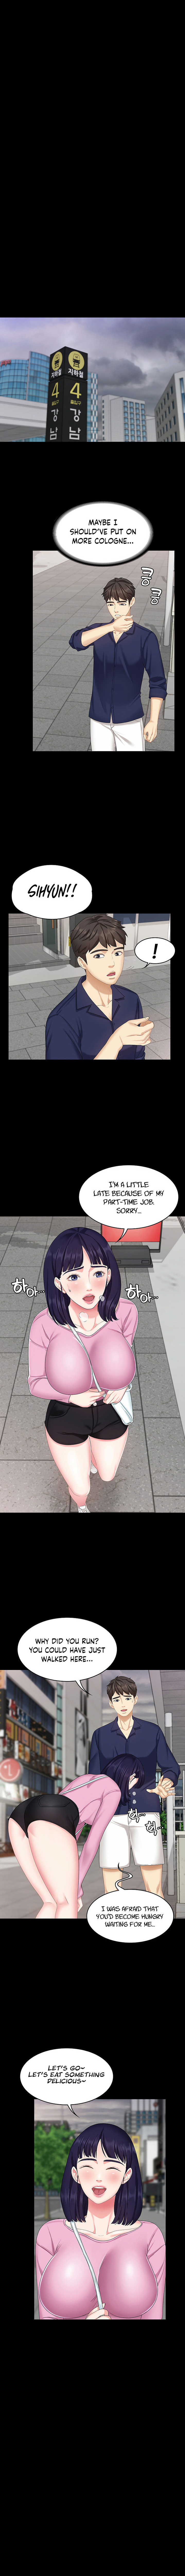 She’s my Younger Sister, but it’s okay Chapter 6 - Page 6